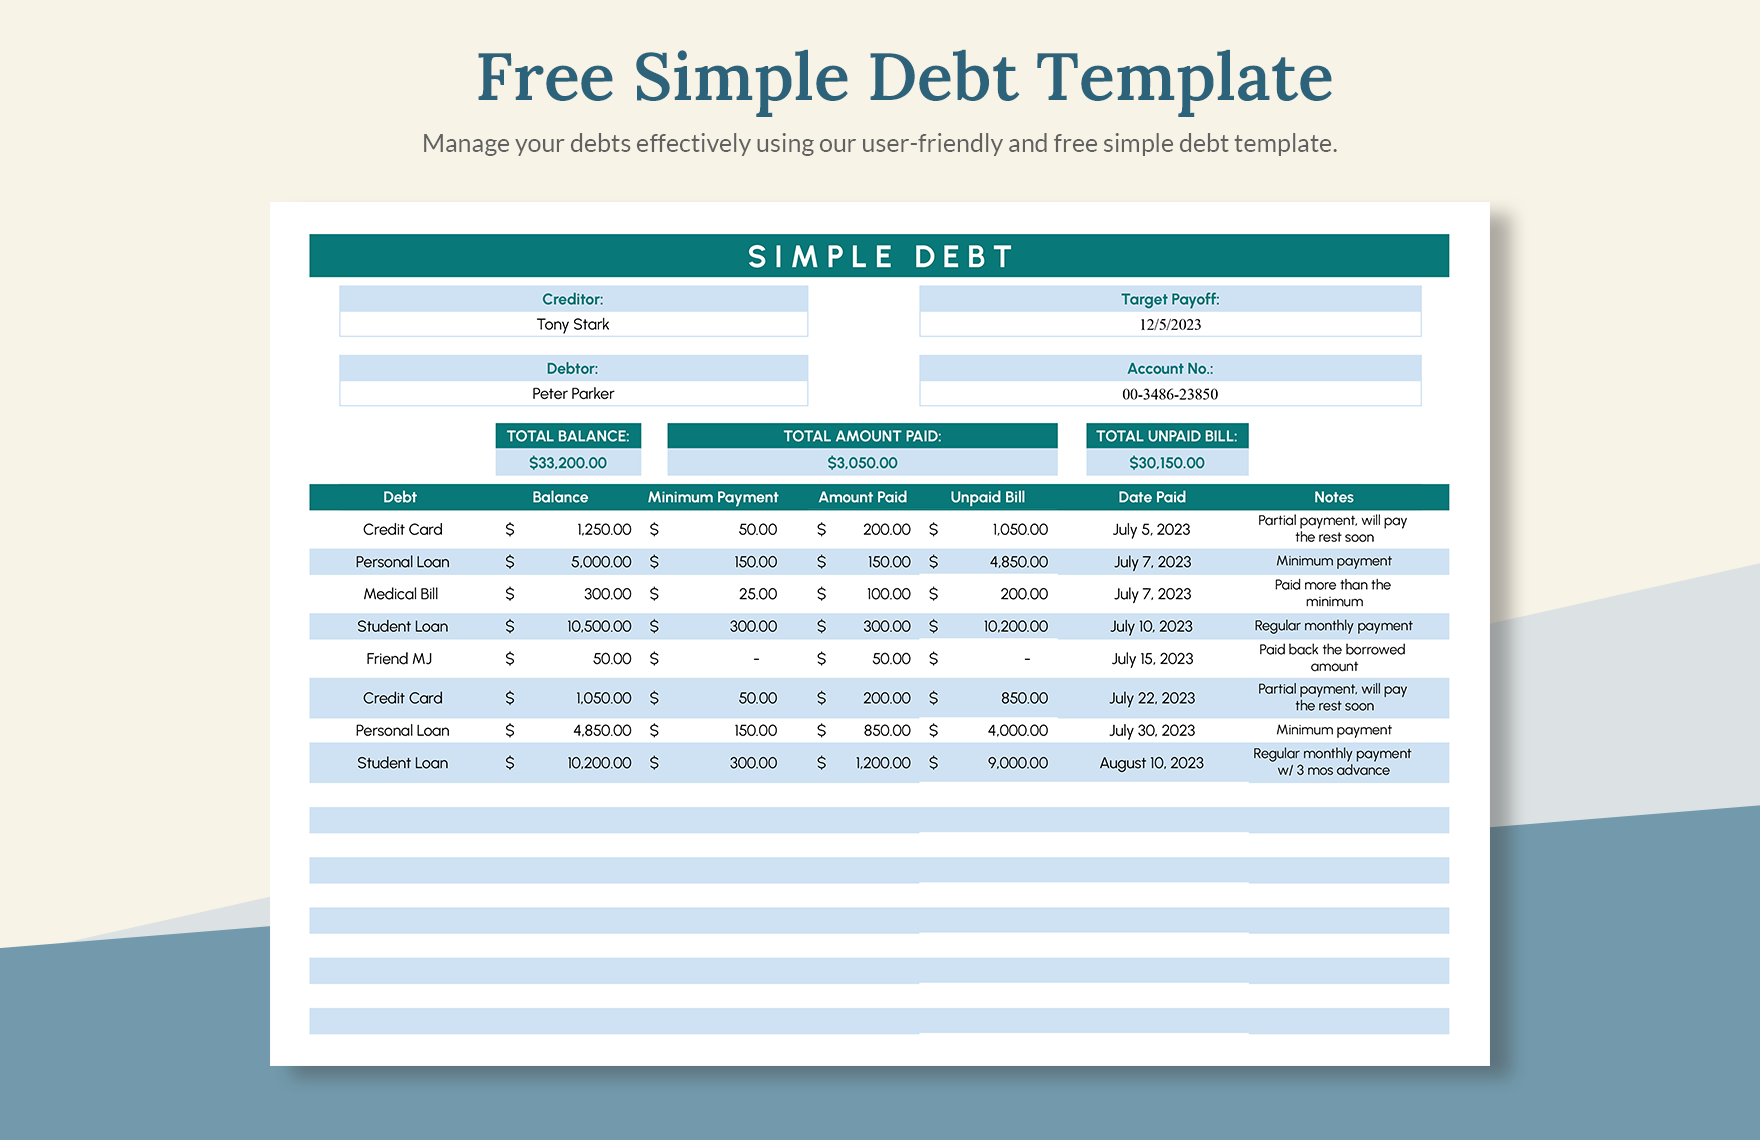 FREE Debt Spreadsheet Template Download in Excel & Google Sheets